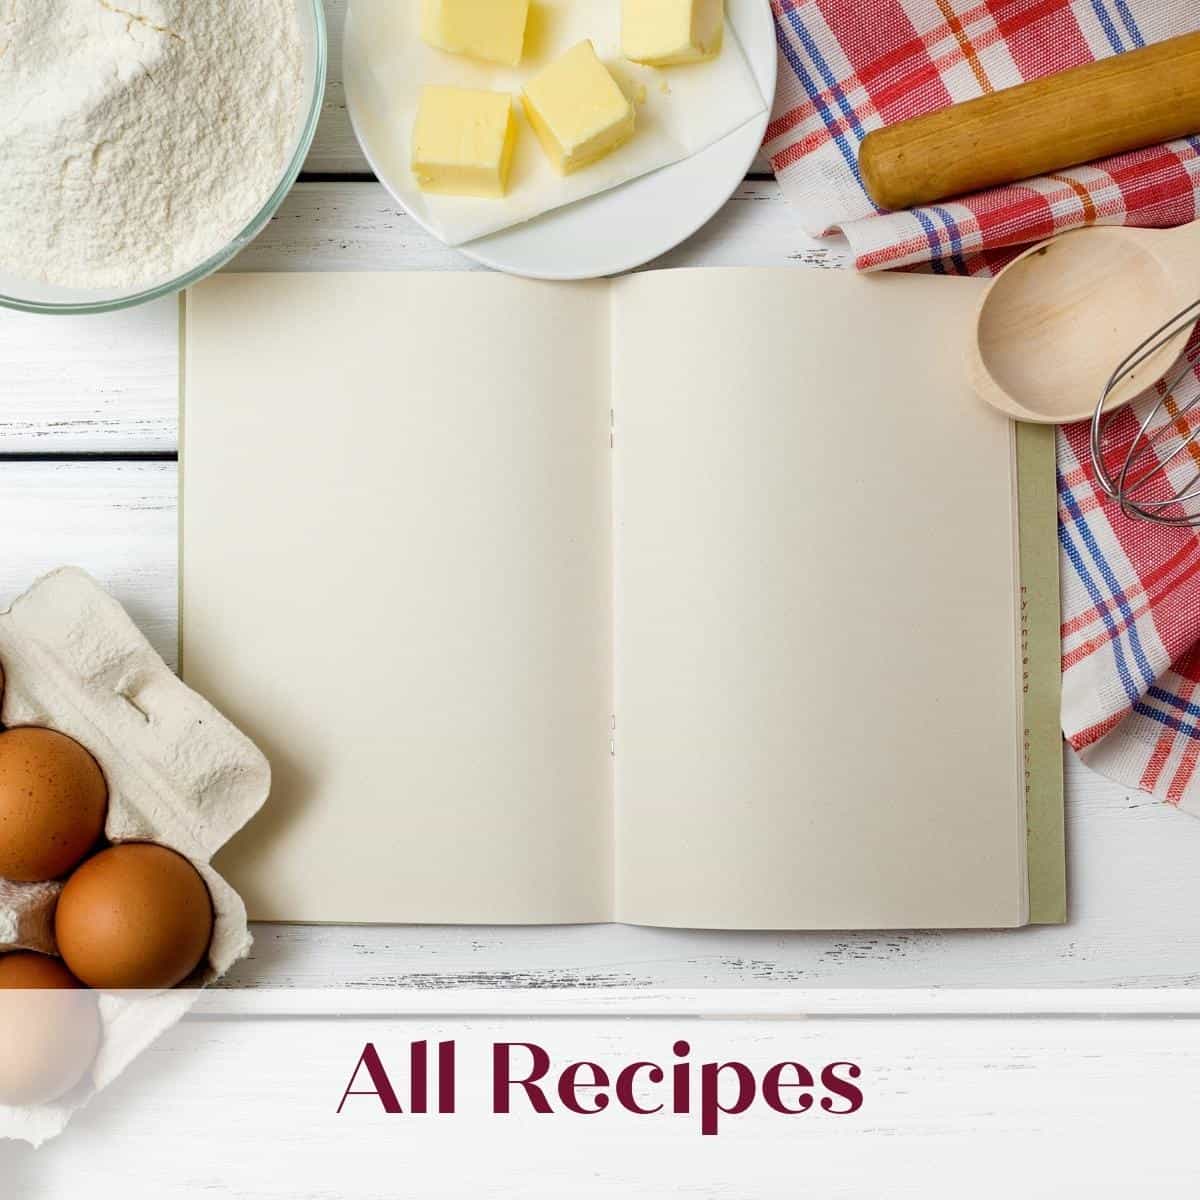 All recipes category graphic with recipe card and baking items.